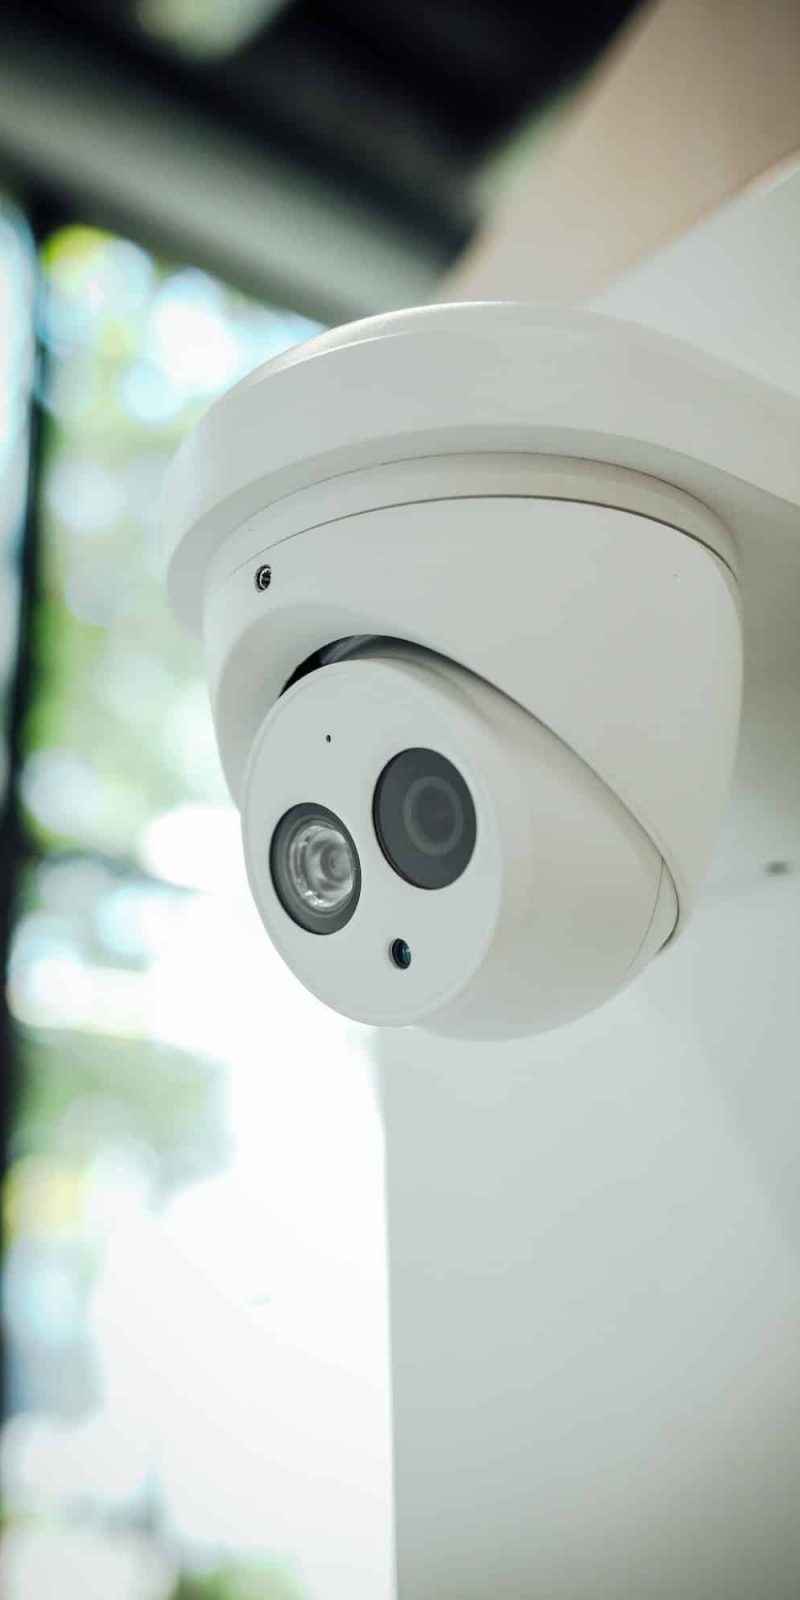 Cloud Security Alarms - cctv-security-camera-or-home-surveillance-cameras-video-protection-safety-system-guard-2.jpg